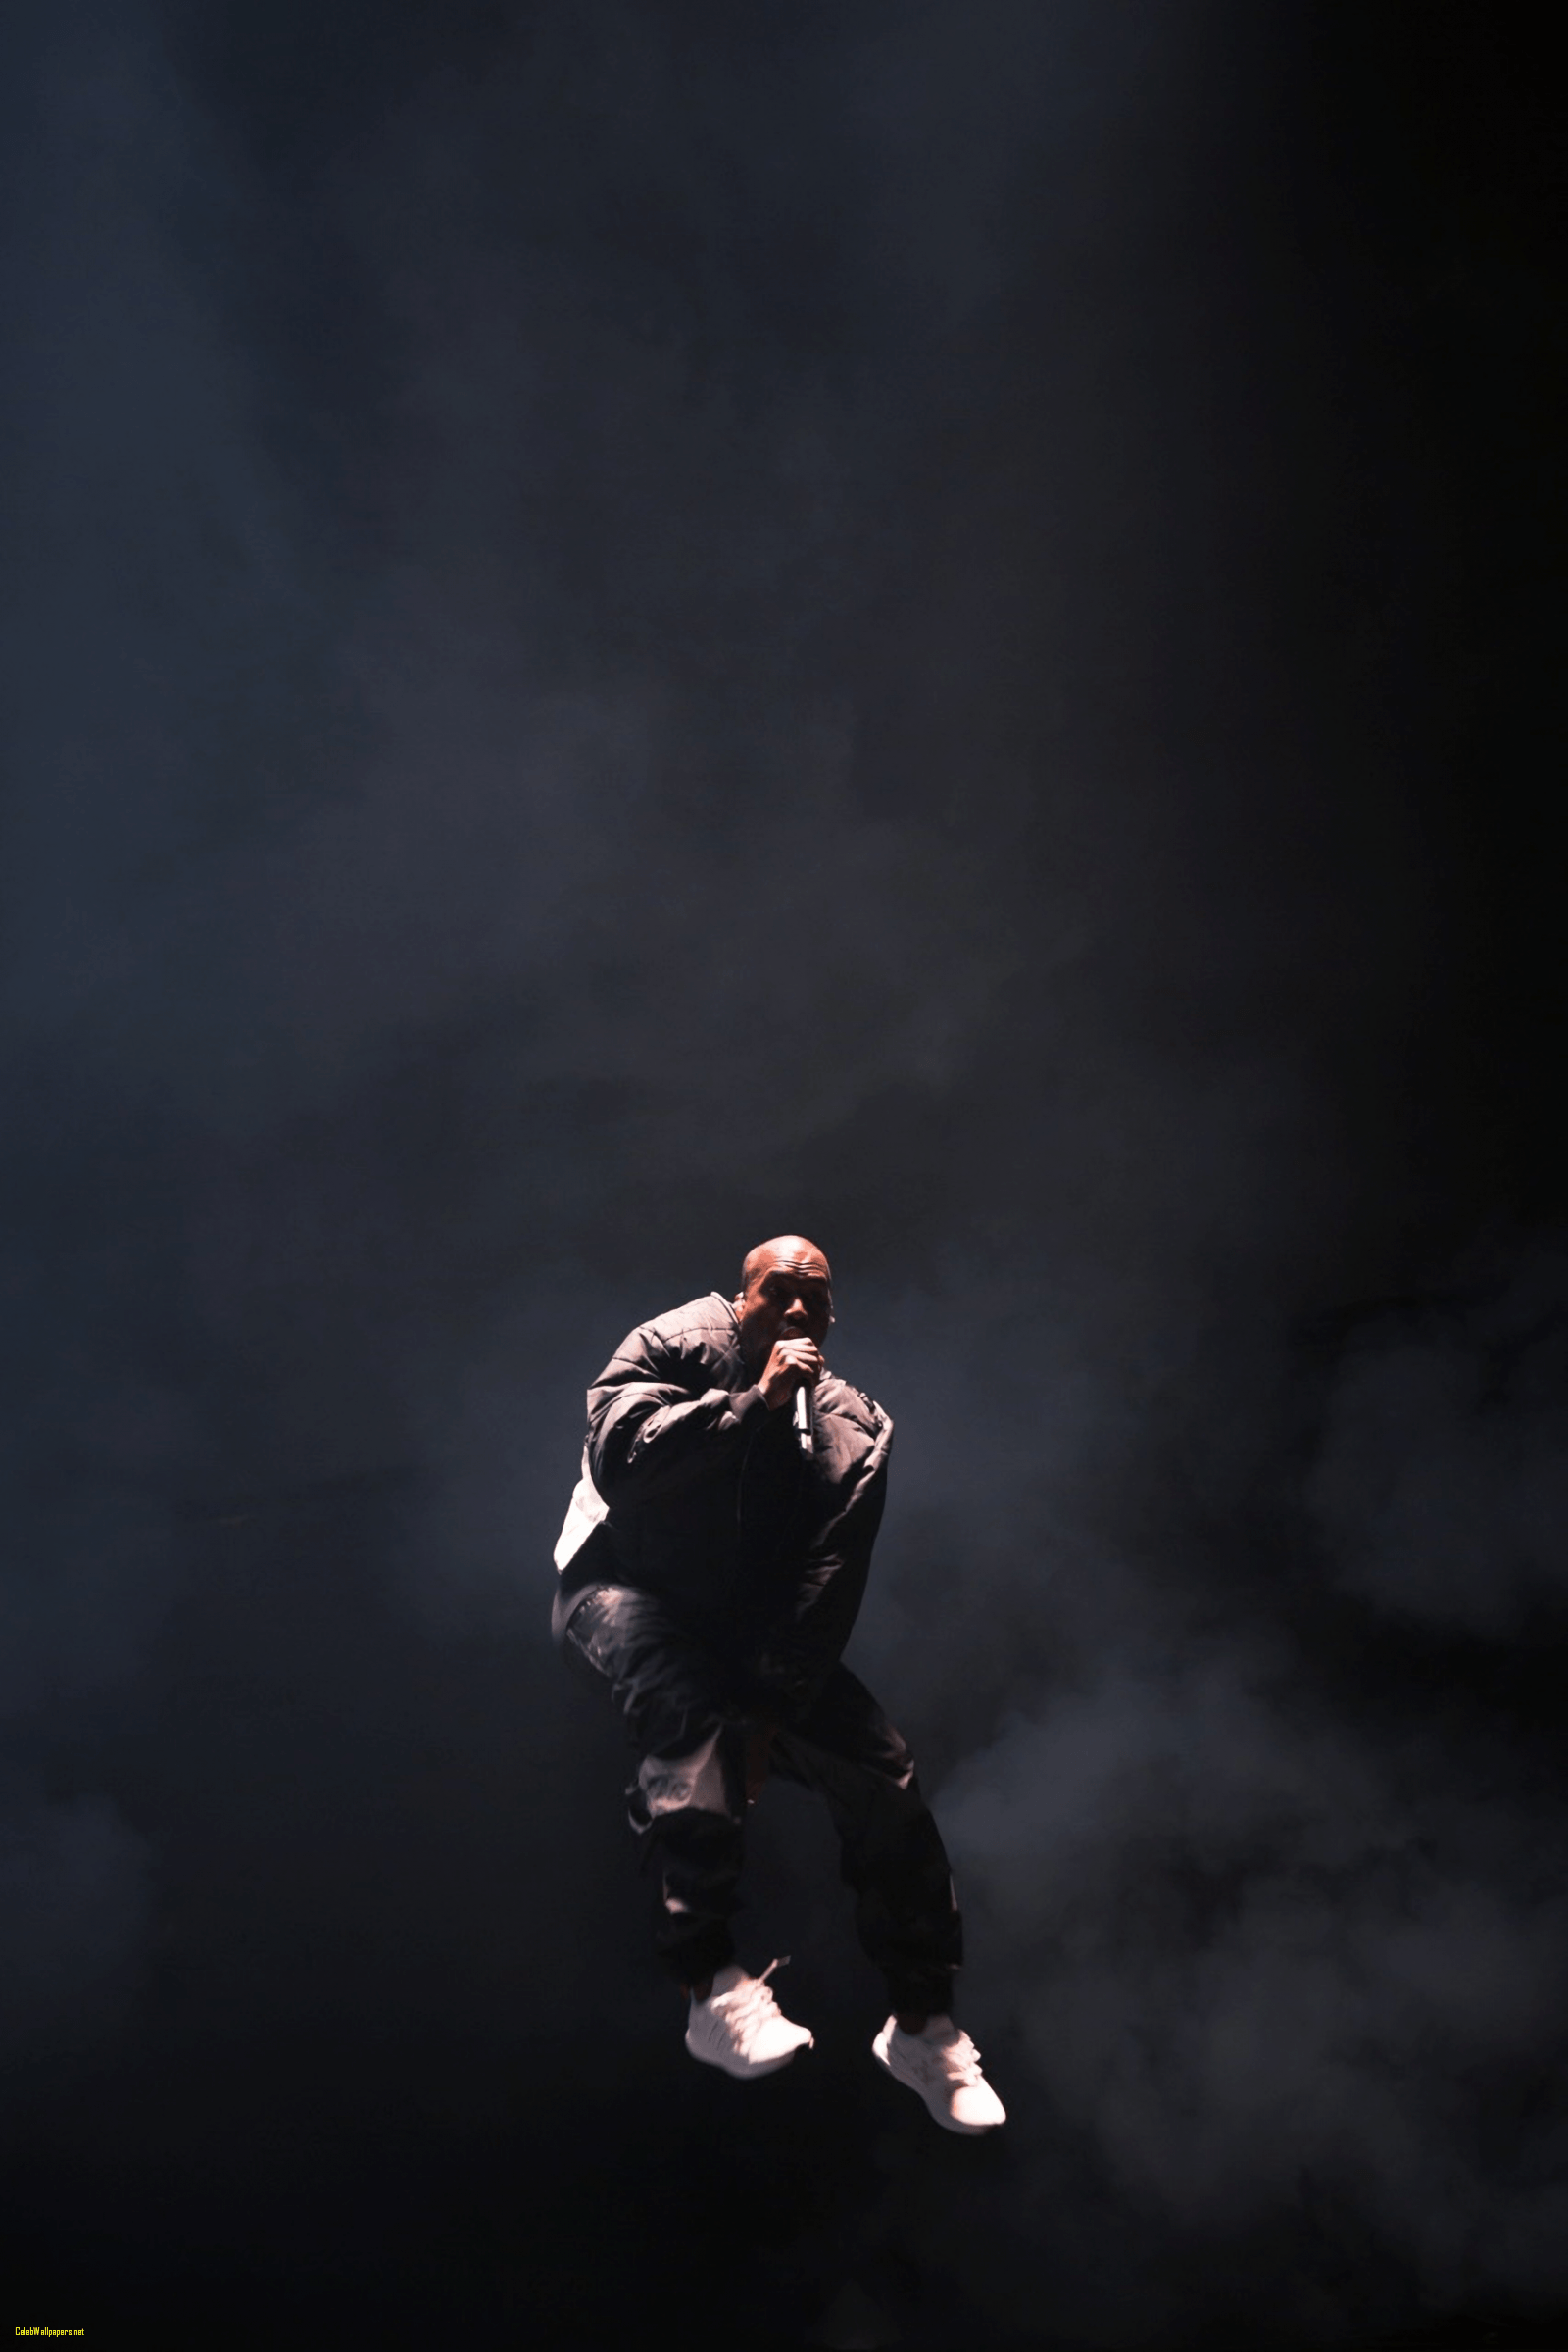 3D touch Wallpaper for iPhone Kanye West forum Fresh Kanye